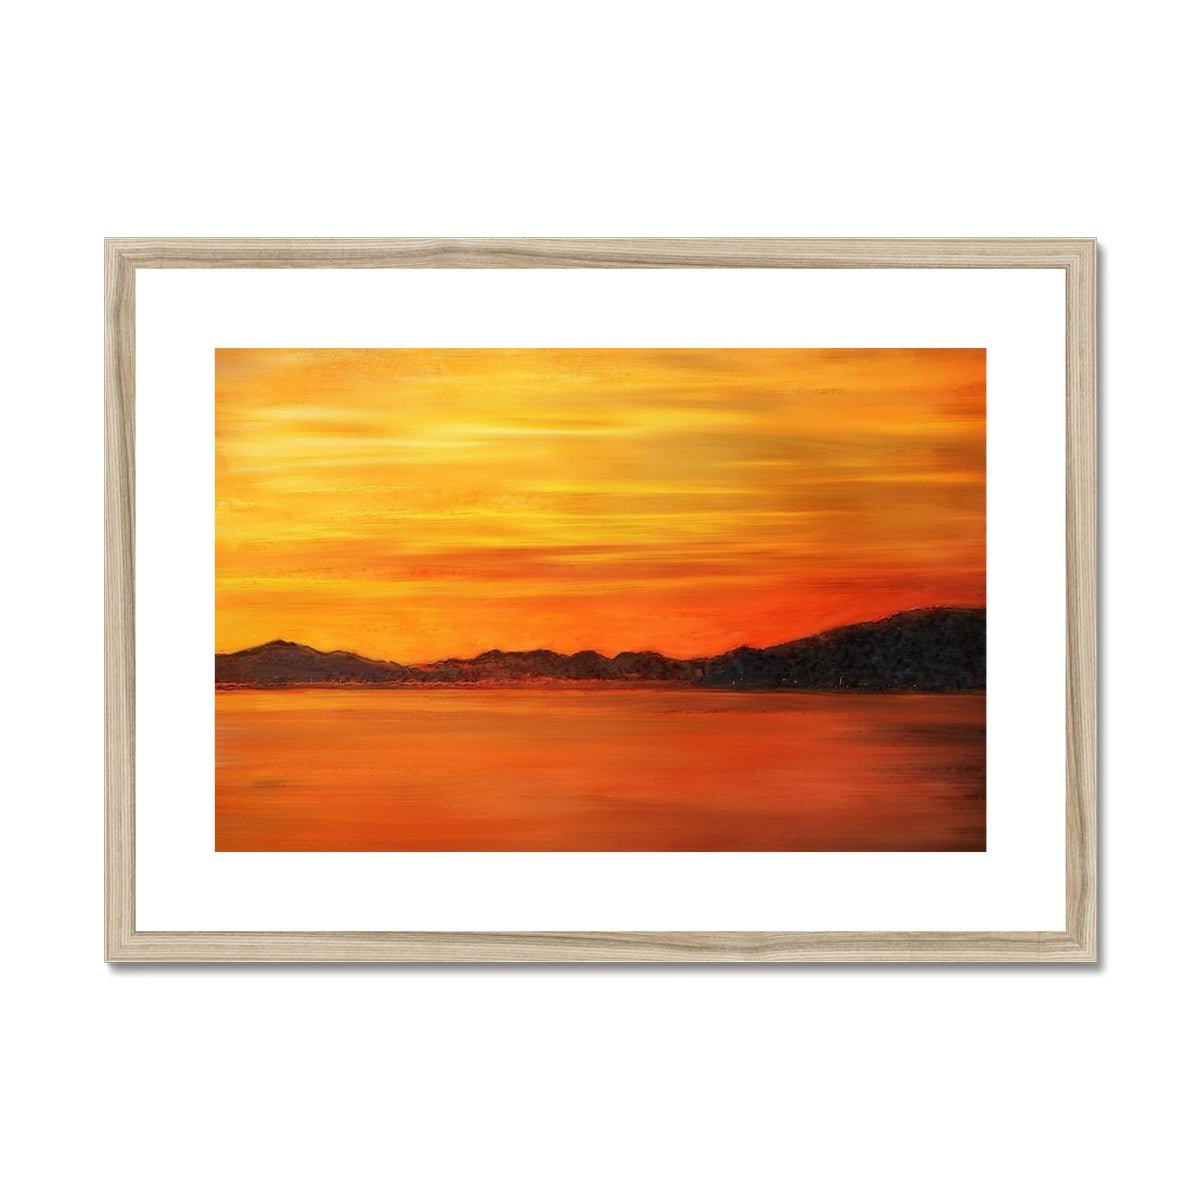 Loch Fyne Sunset Painting | Framed & Mounted Prints From Scotland-Framed & Mounted Prints-Scottish Lochs & Mountains Art Gallery-A2 Landscape-Natural Frame-Paintings, Prints, Homeware, Art Gifts From Scotland By Scottish Artist Kevin Hunter